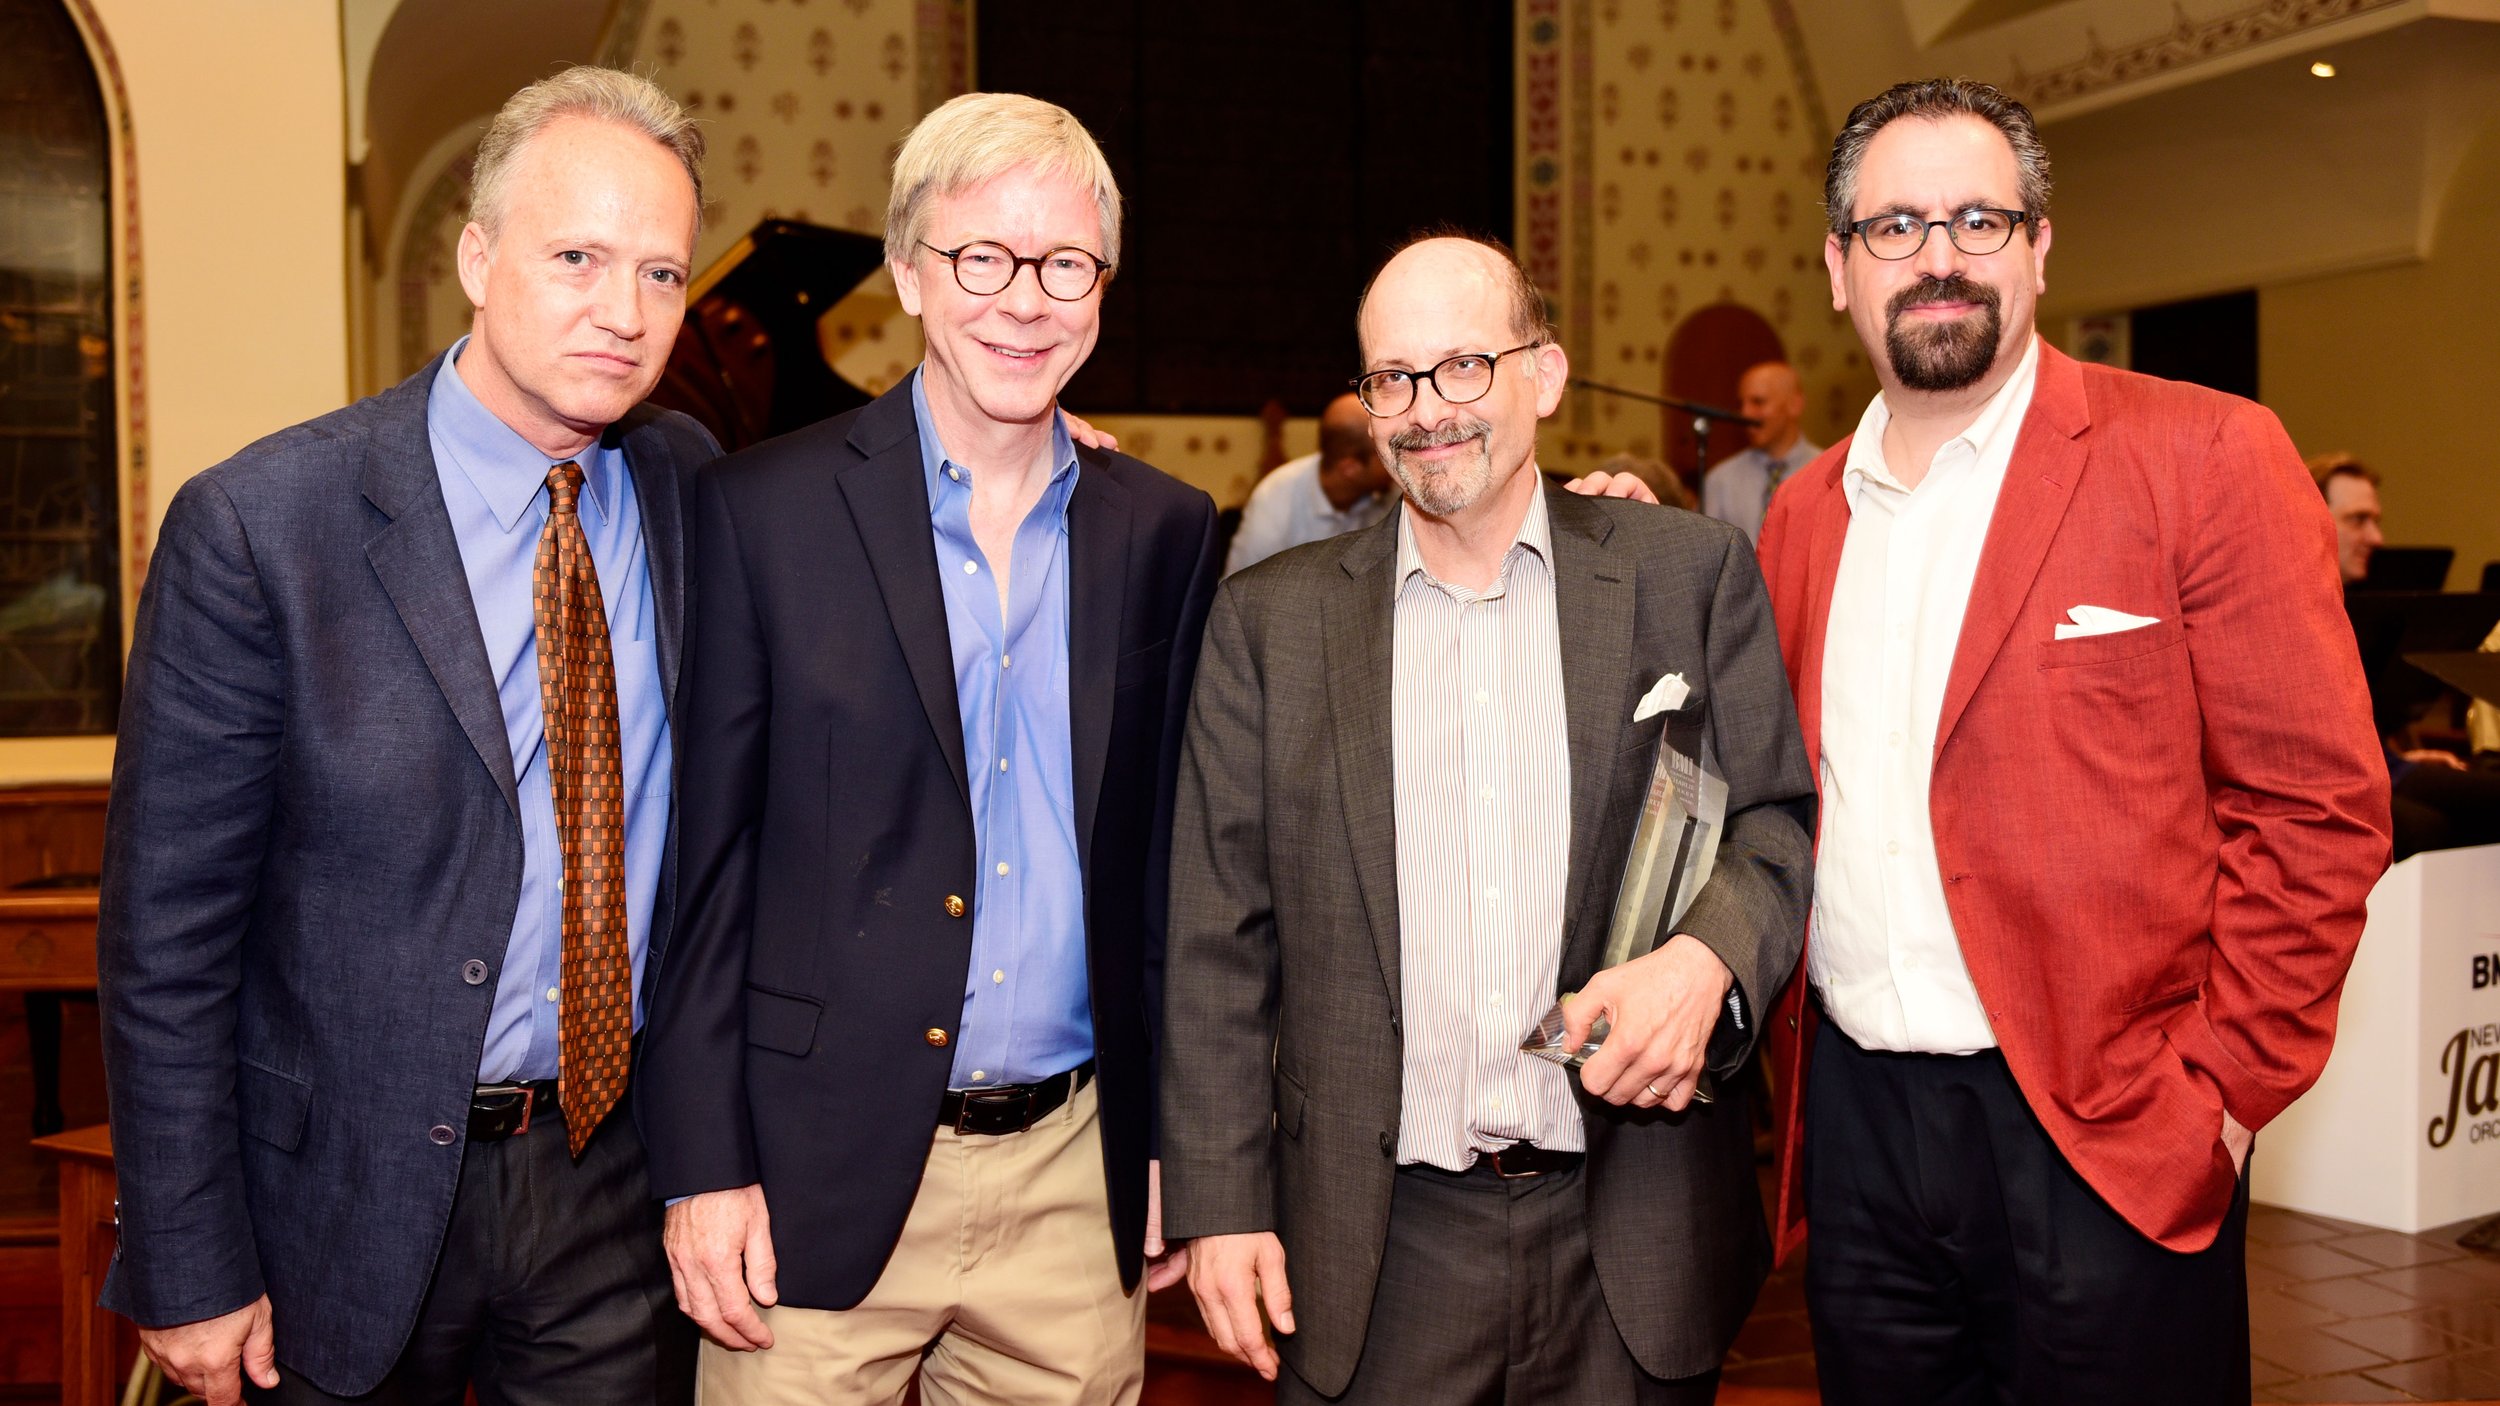  (L-R) BMI Jazz Composers Workshop Associate Musical Director Ted Nash, BMI Director of Musical Theatre and Jazz and BMI Foundation Board Member Pat Cook, 2016 Charlie Parker Prize Winner Dan Block, and BMI Jazz Composers Workshop Musical Director An